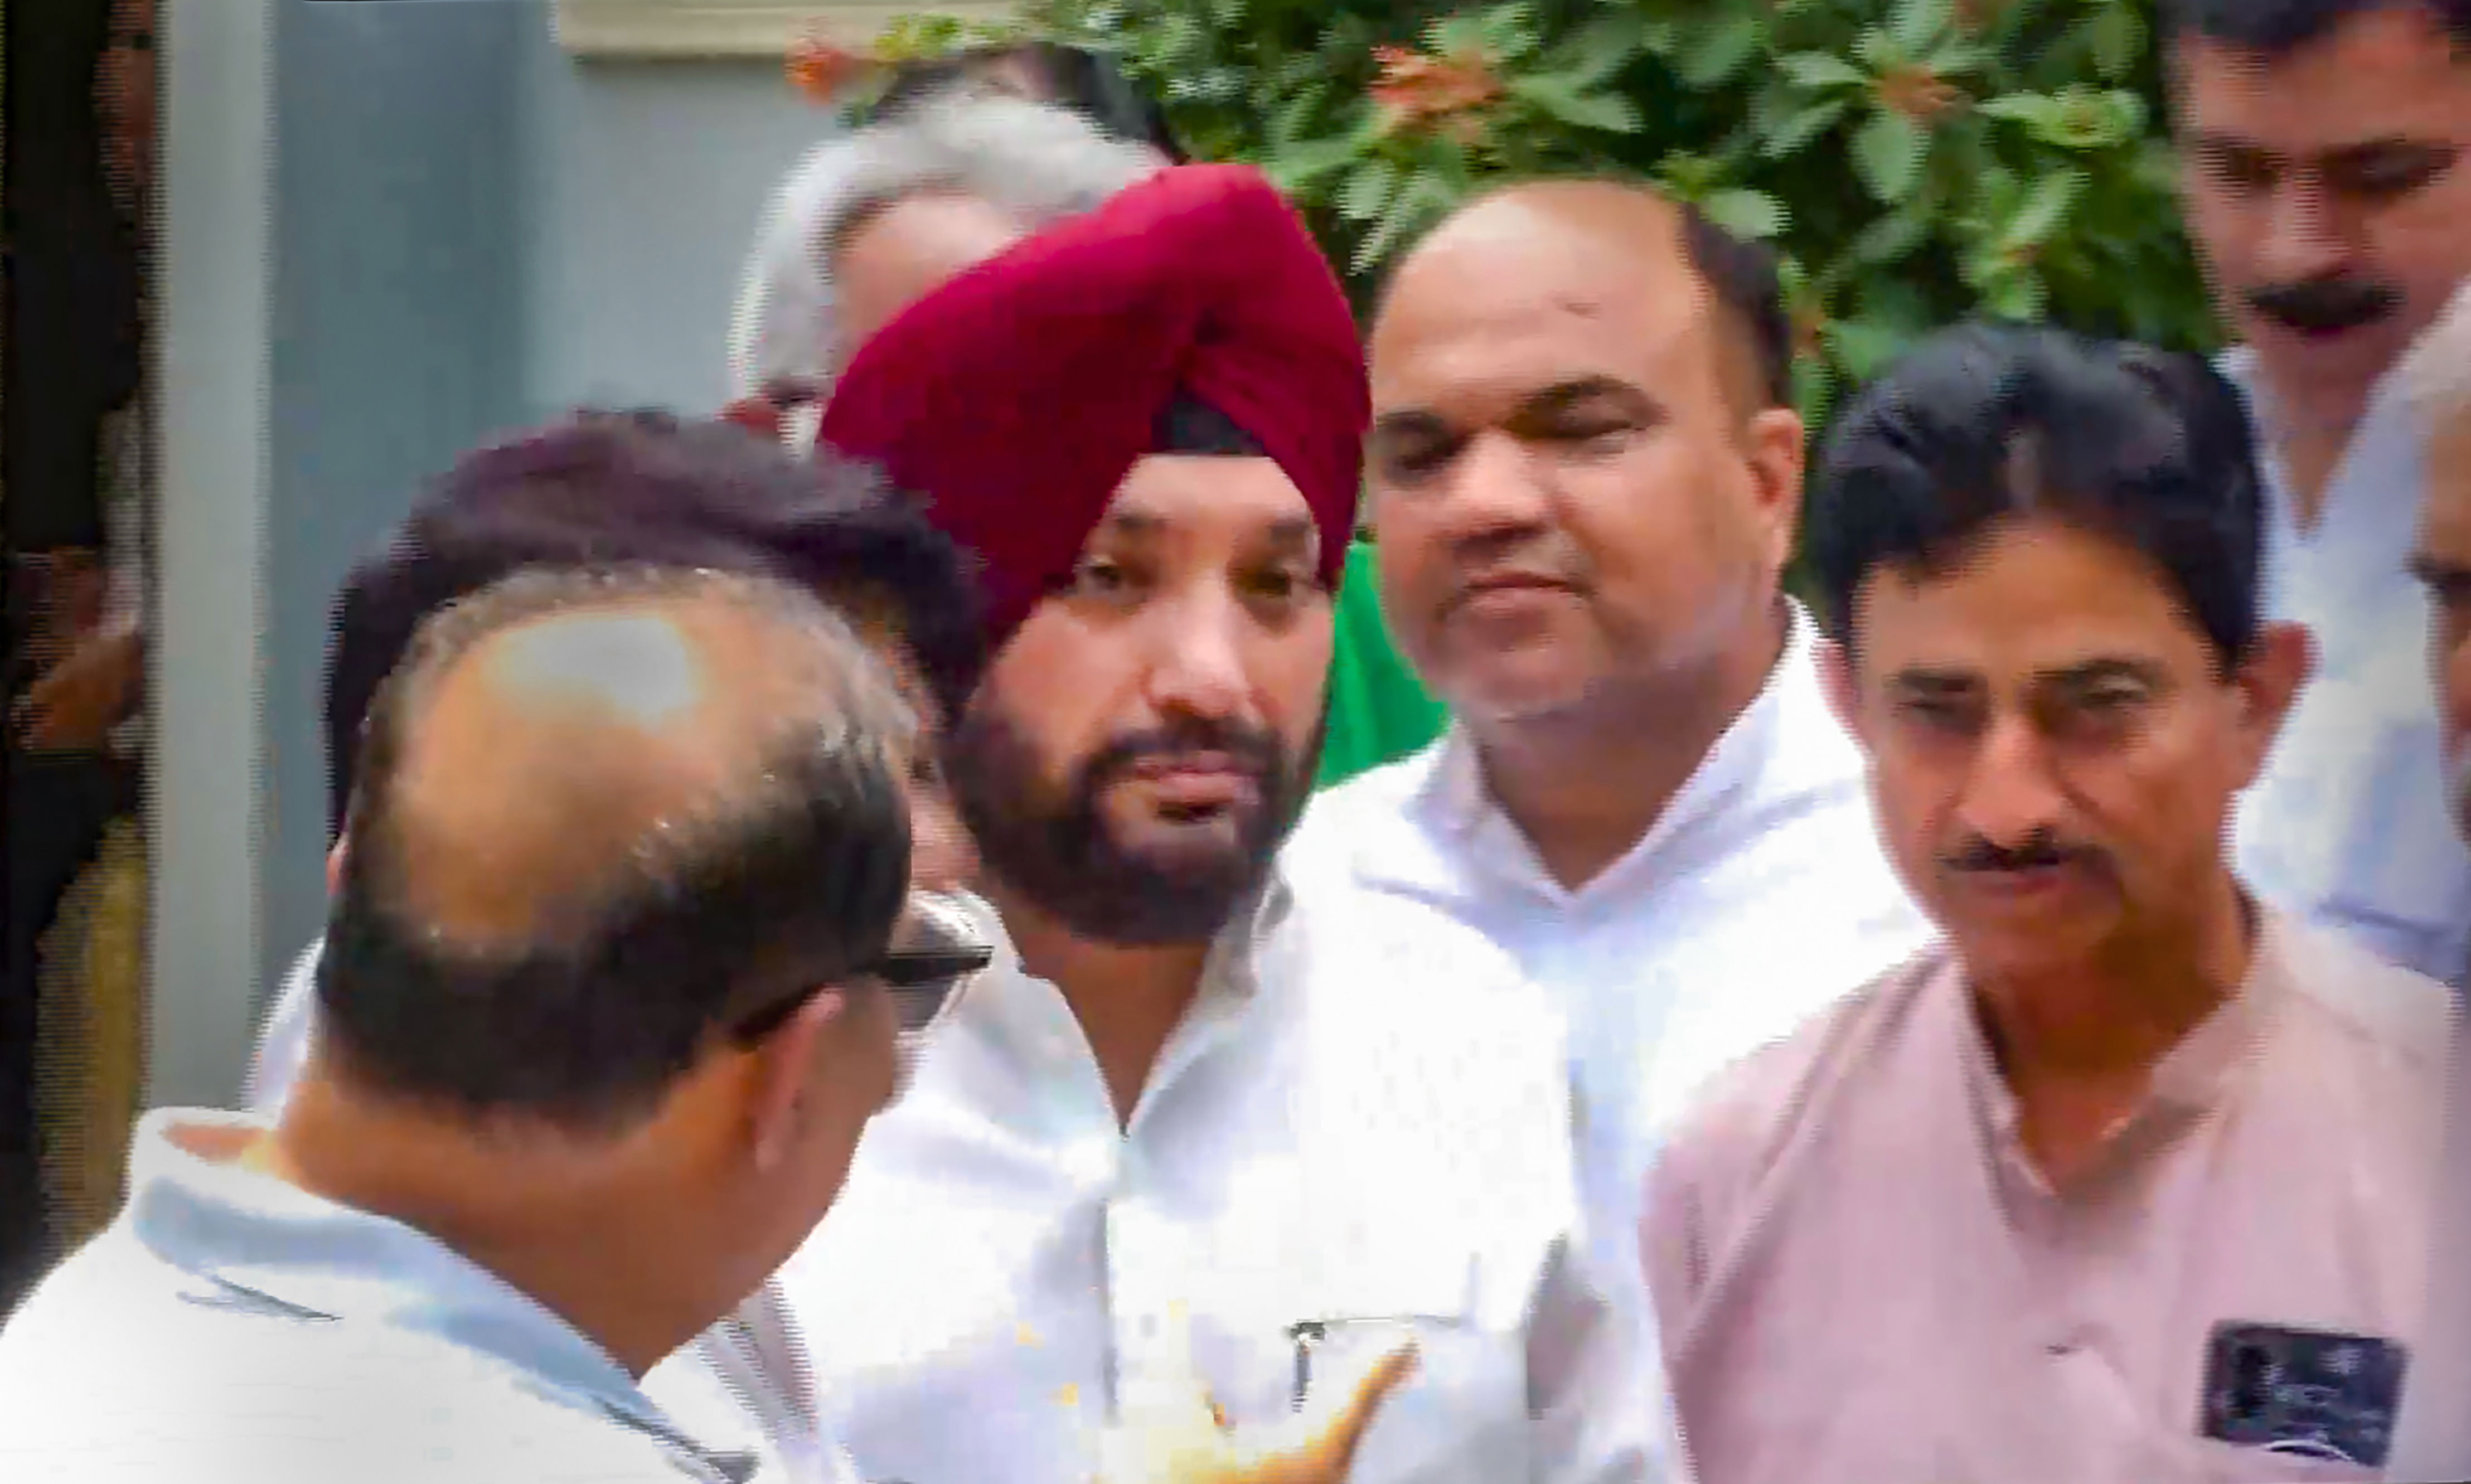 credit for aap-cong alliance also goes to lovely, says sanjay singh; cong leader hits back